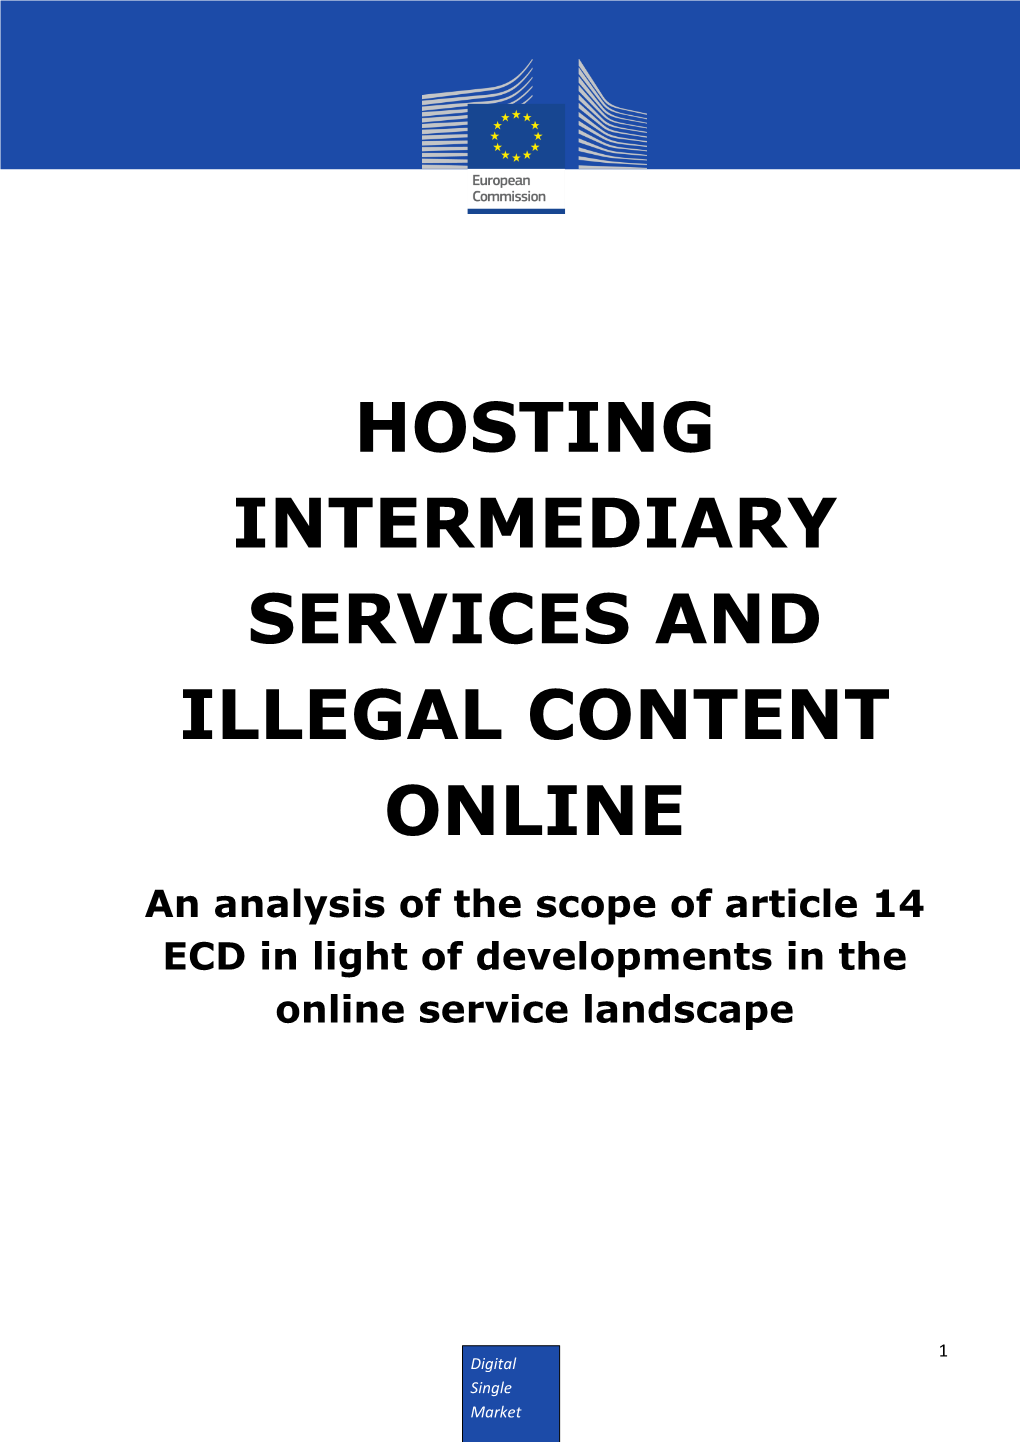 Hosting Intermediary Services and Illegal Content Online